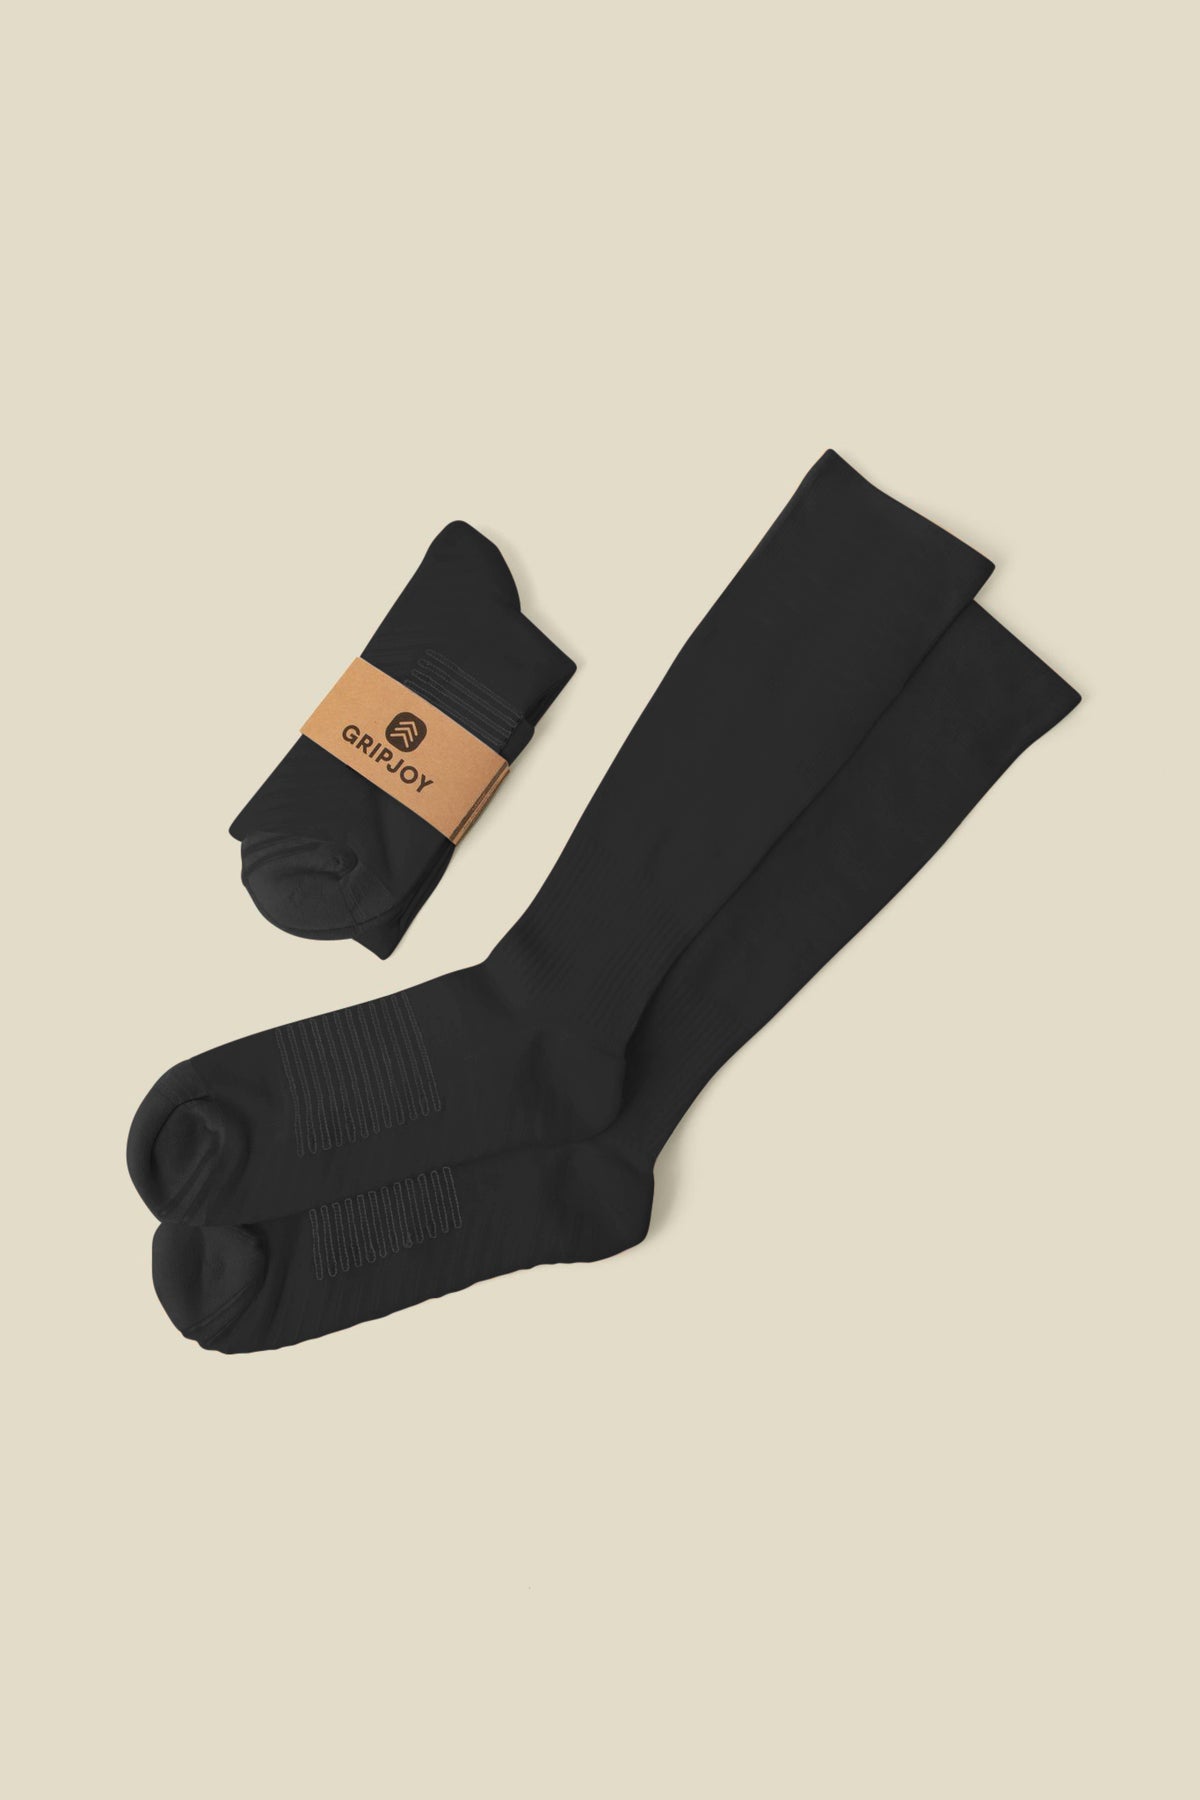 Women&#39;s Black Compression Socks with Grips - 2 Pairs - Gripjoy Socks